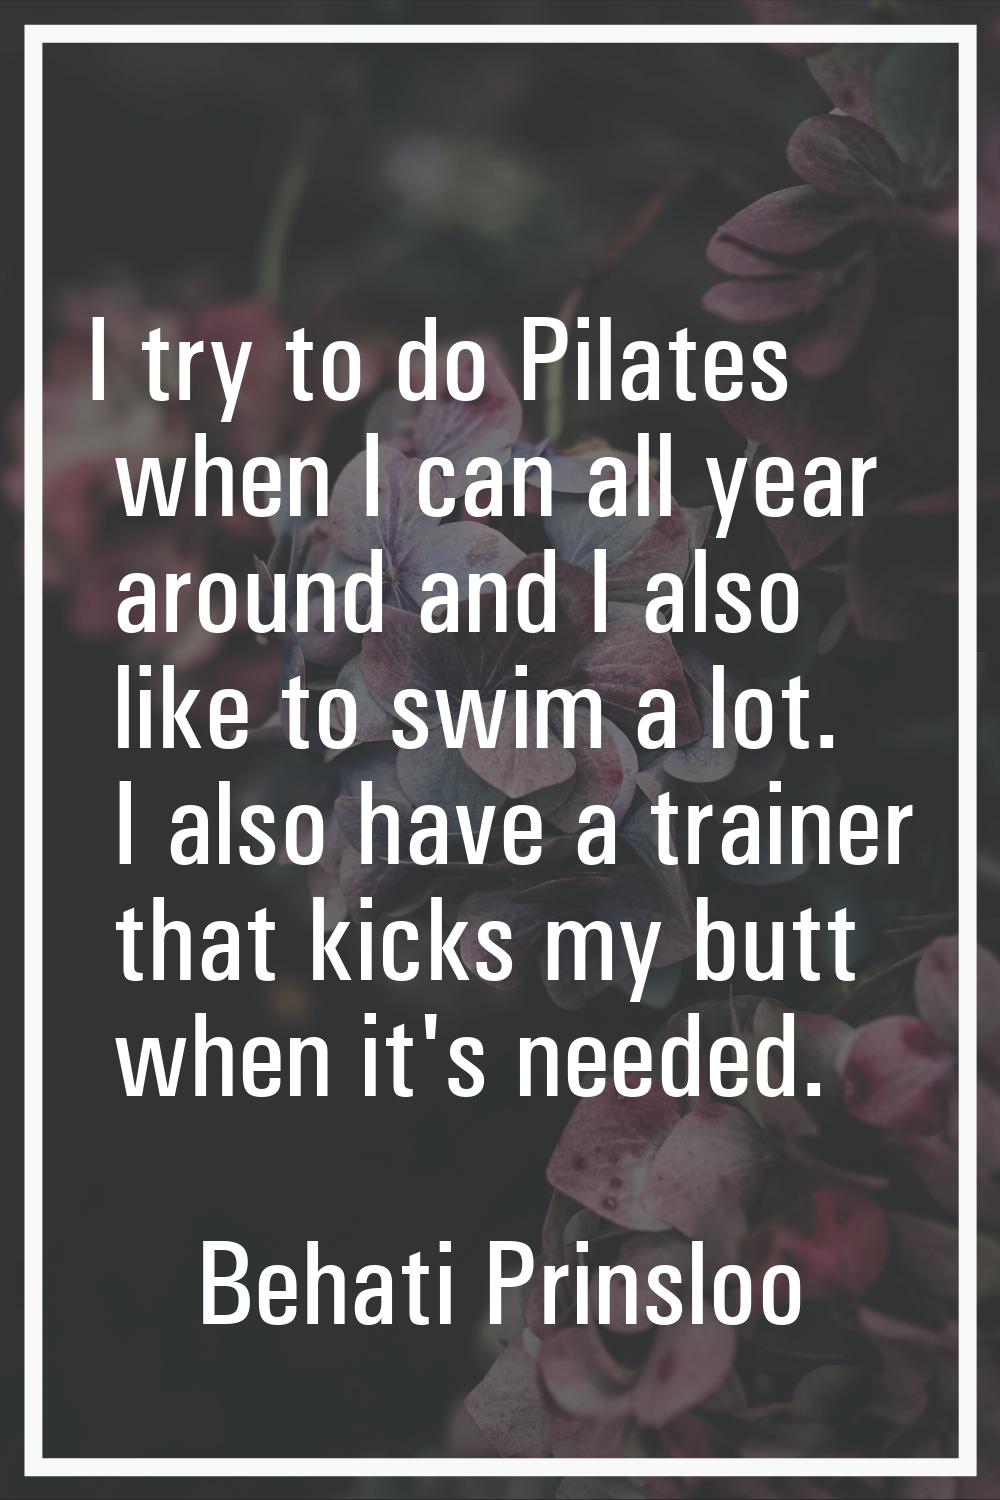 I try to do Pilates when I can all year around and I also like to swim a lot. I also have a trainer